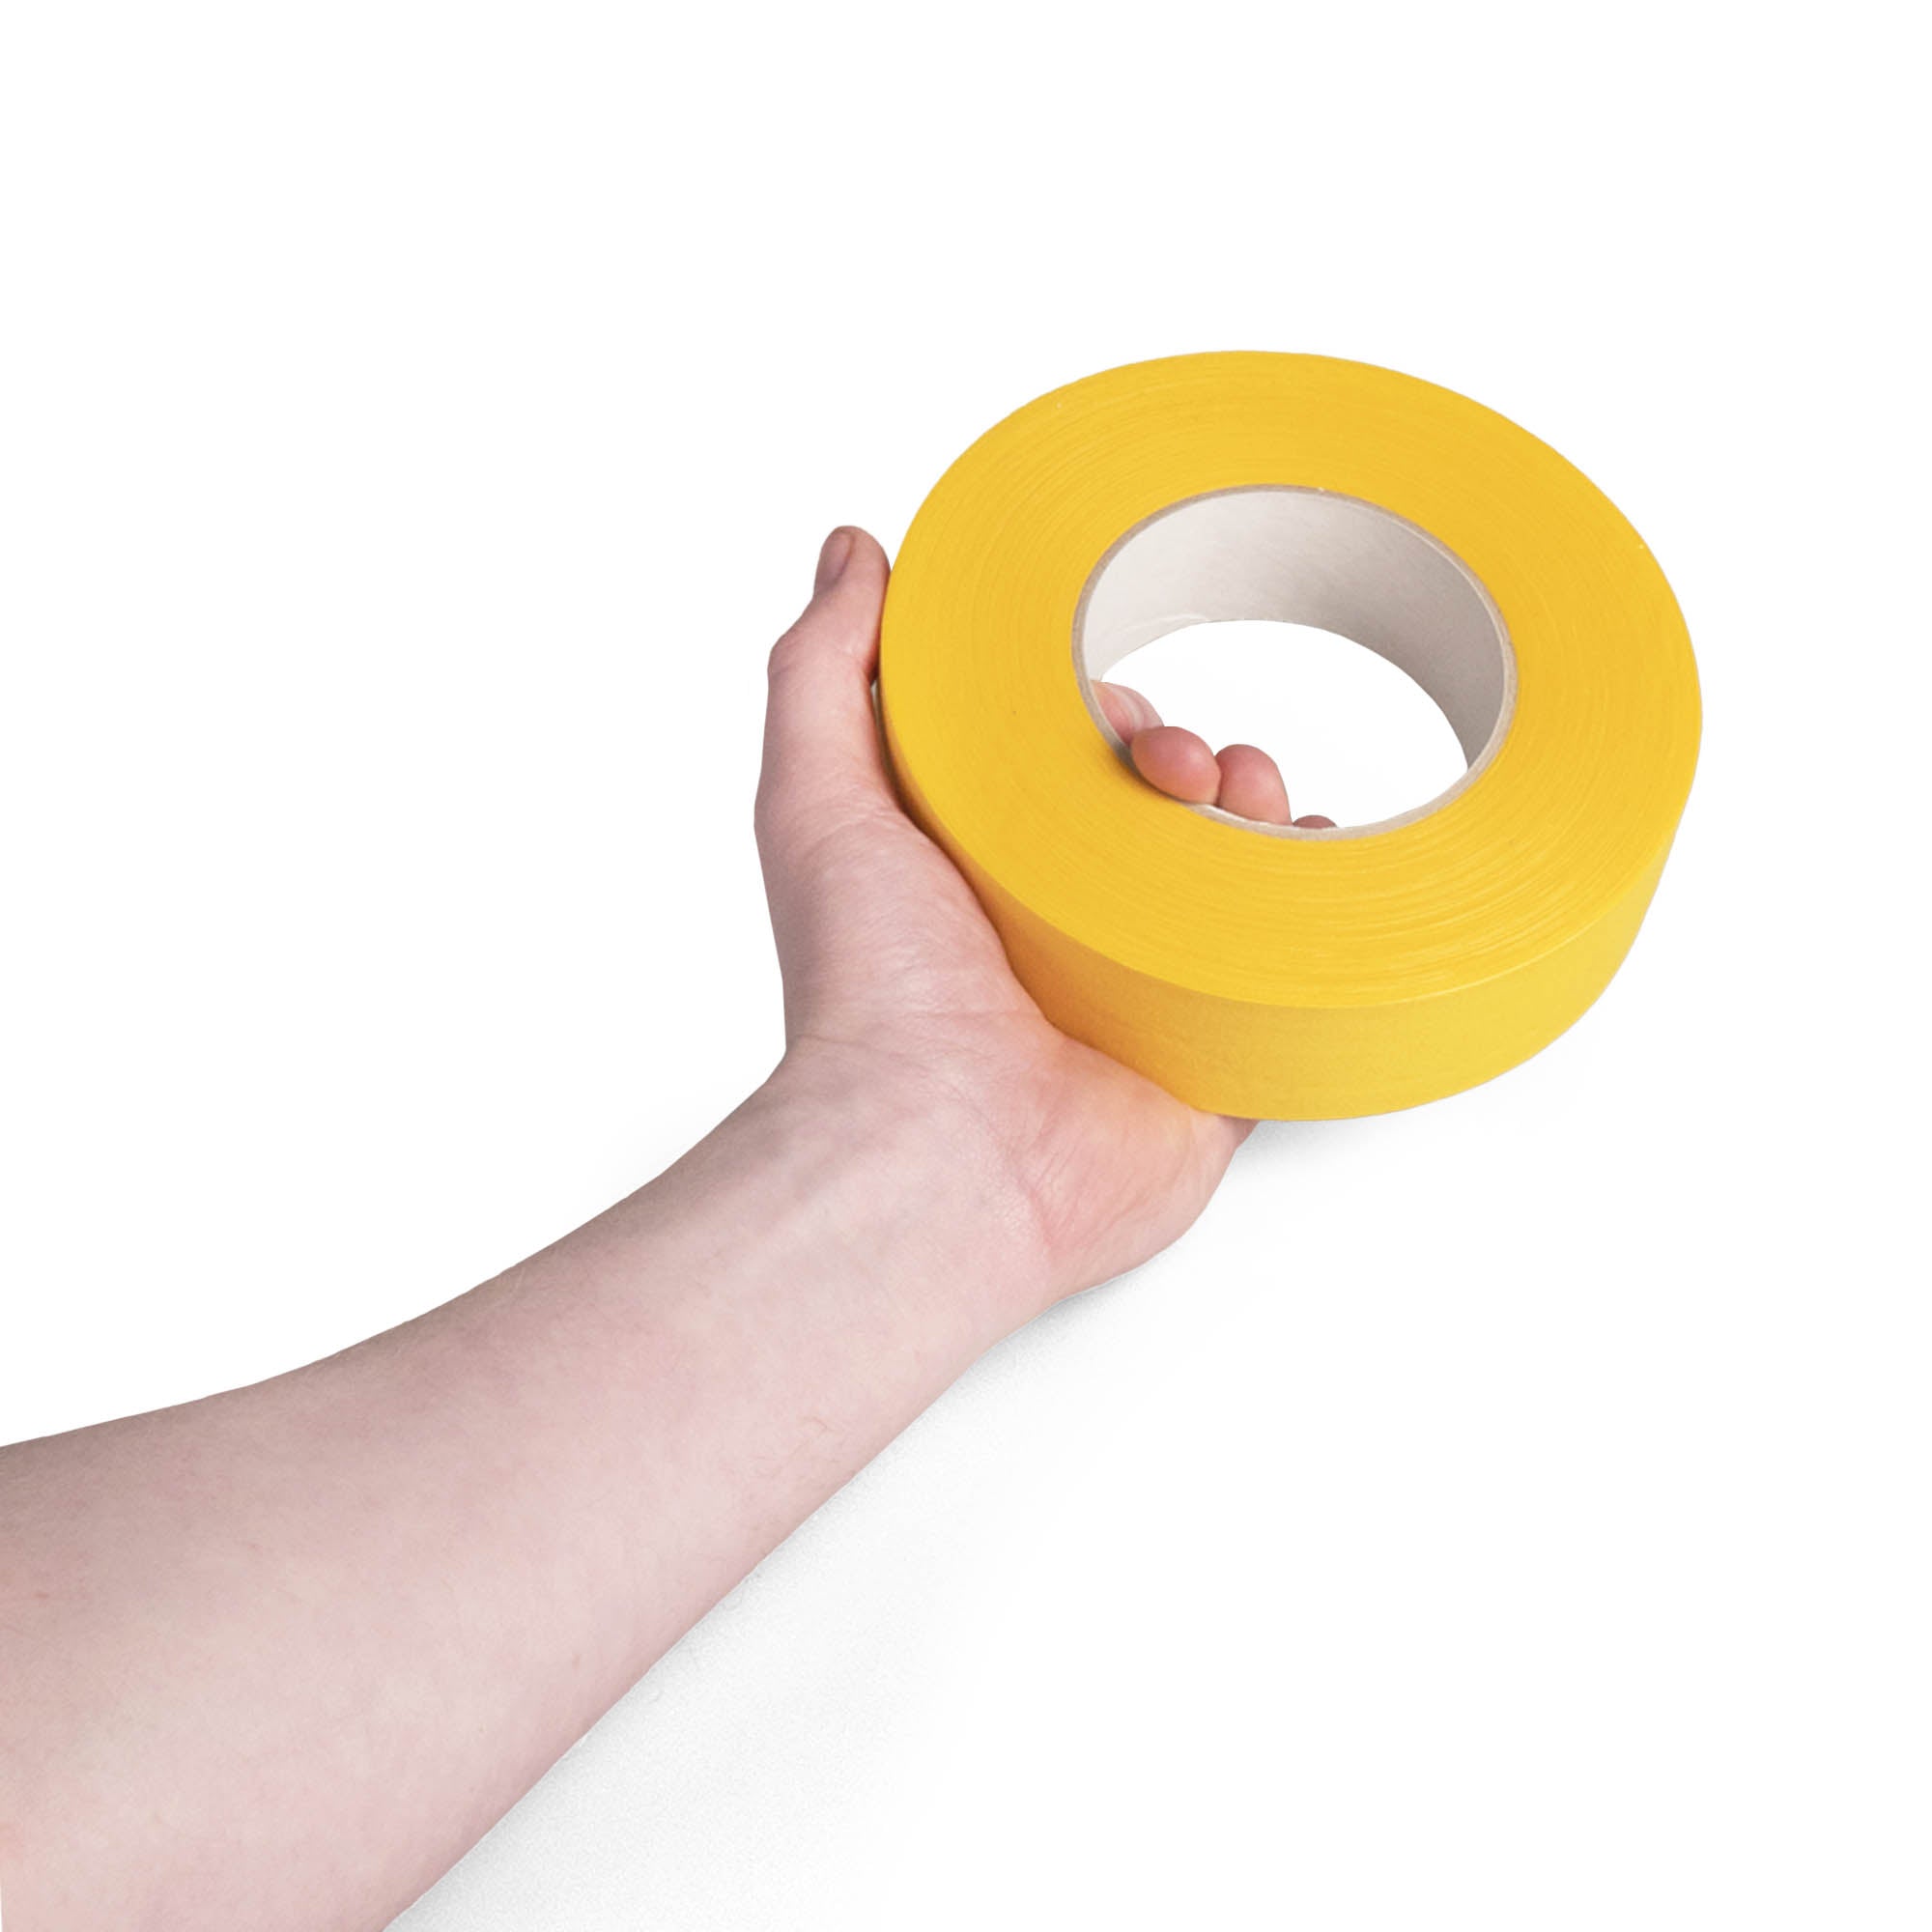 yellow 3.8cm wide tape in hand